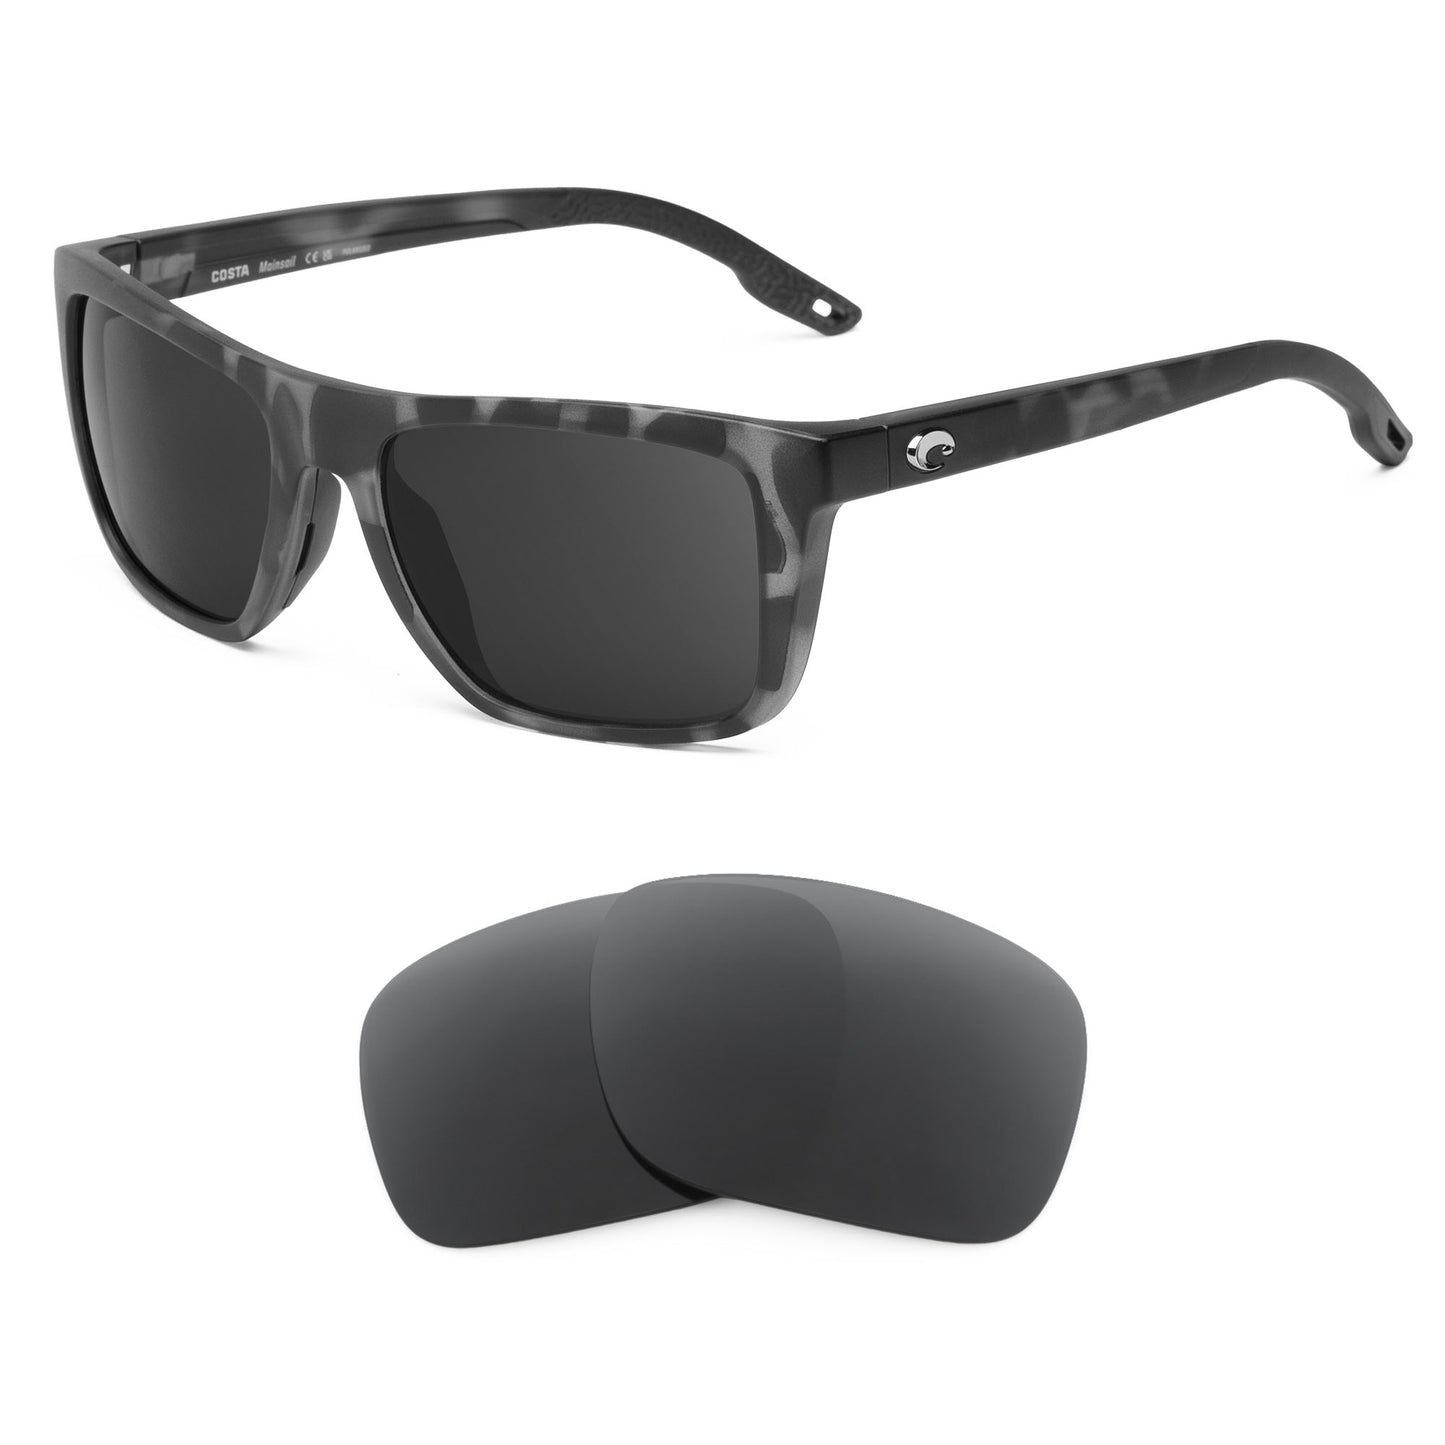 Costa Mainsail sunglasses with replacement lenses